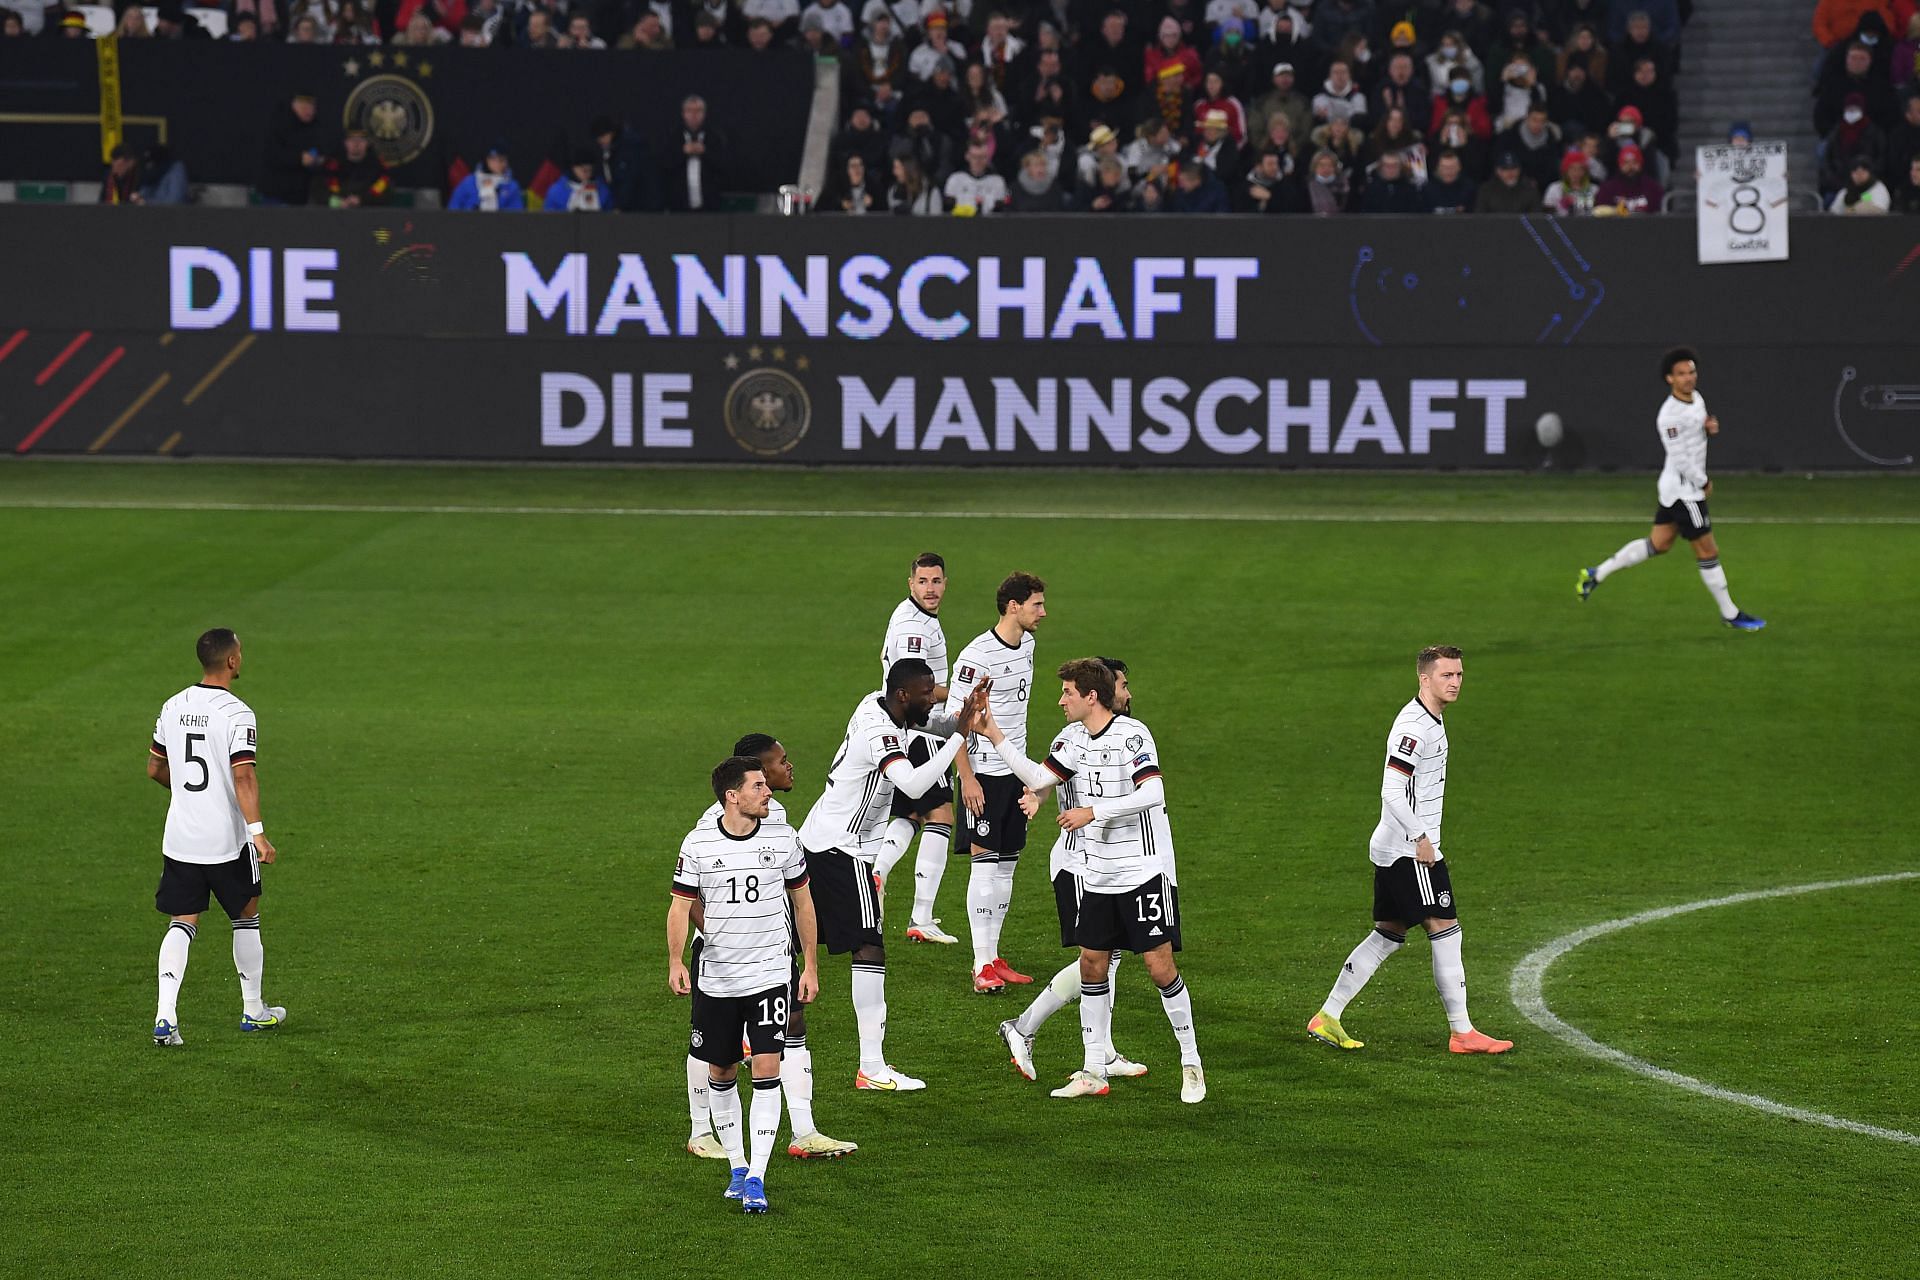 Germany - the first European team to qualify for the 2022 FIFA World Cup.